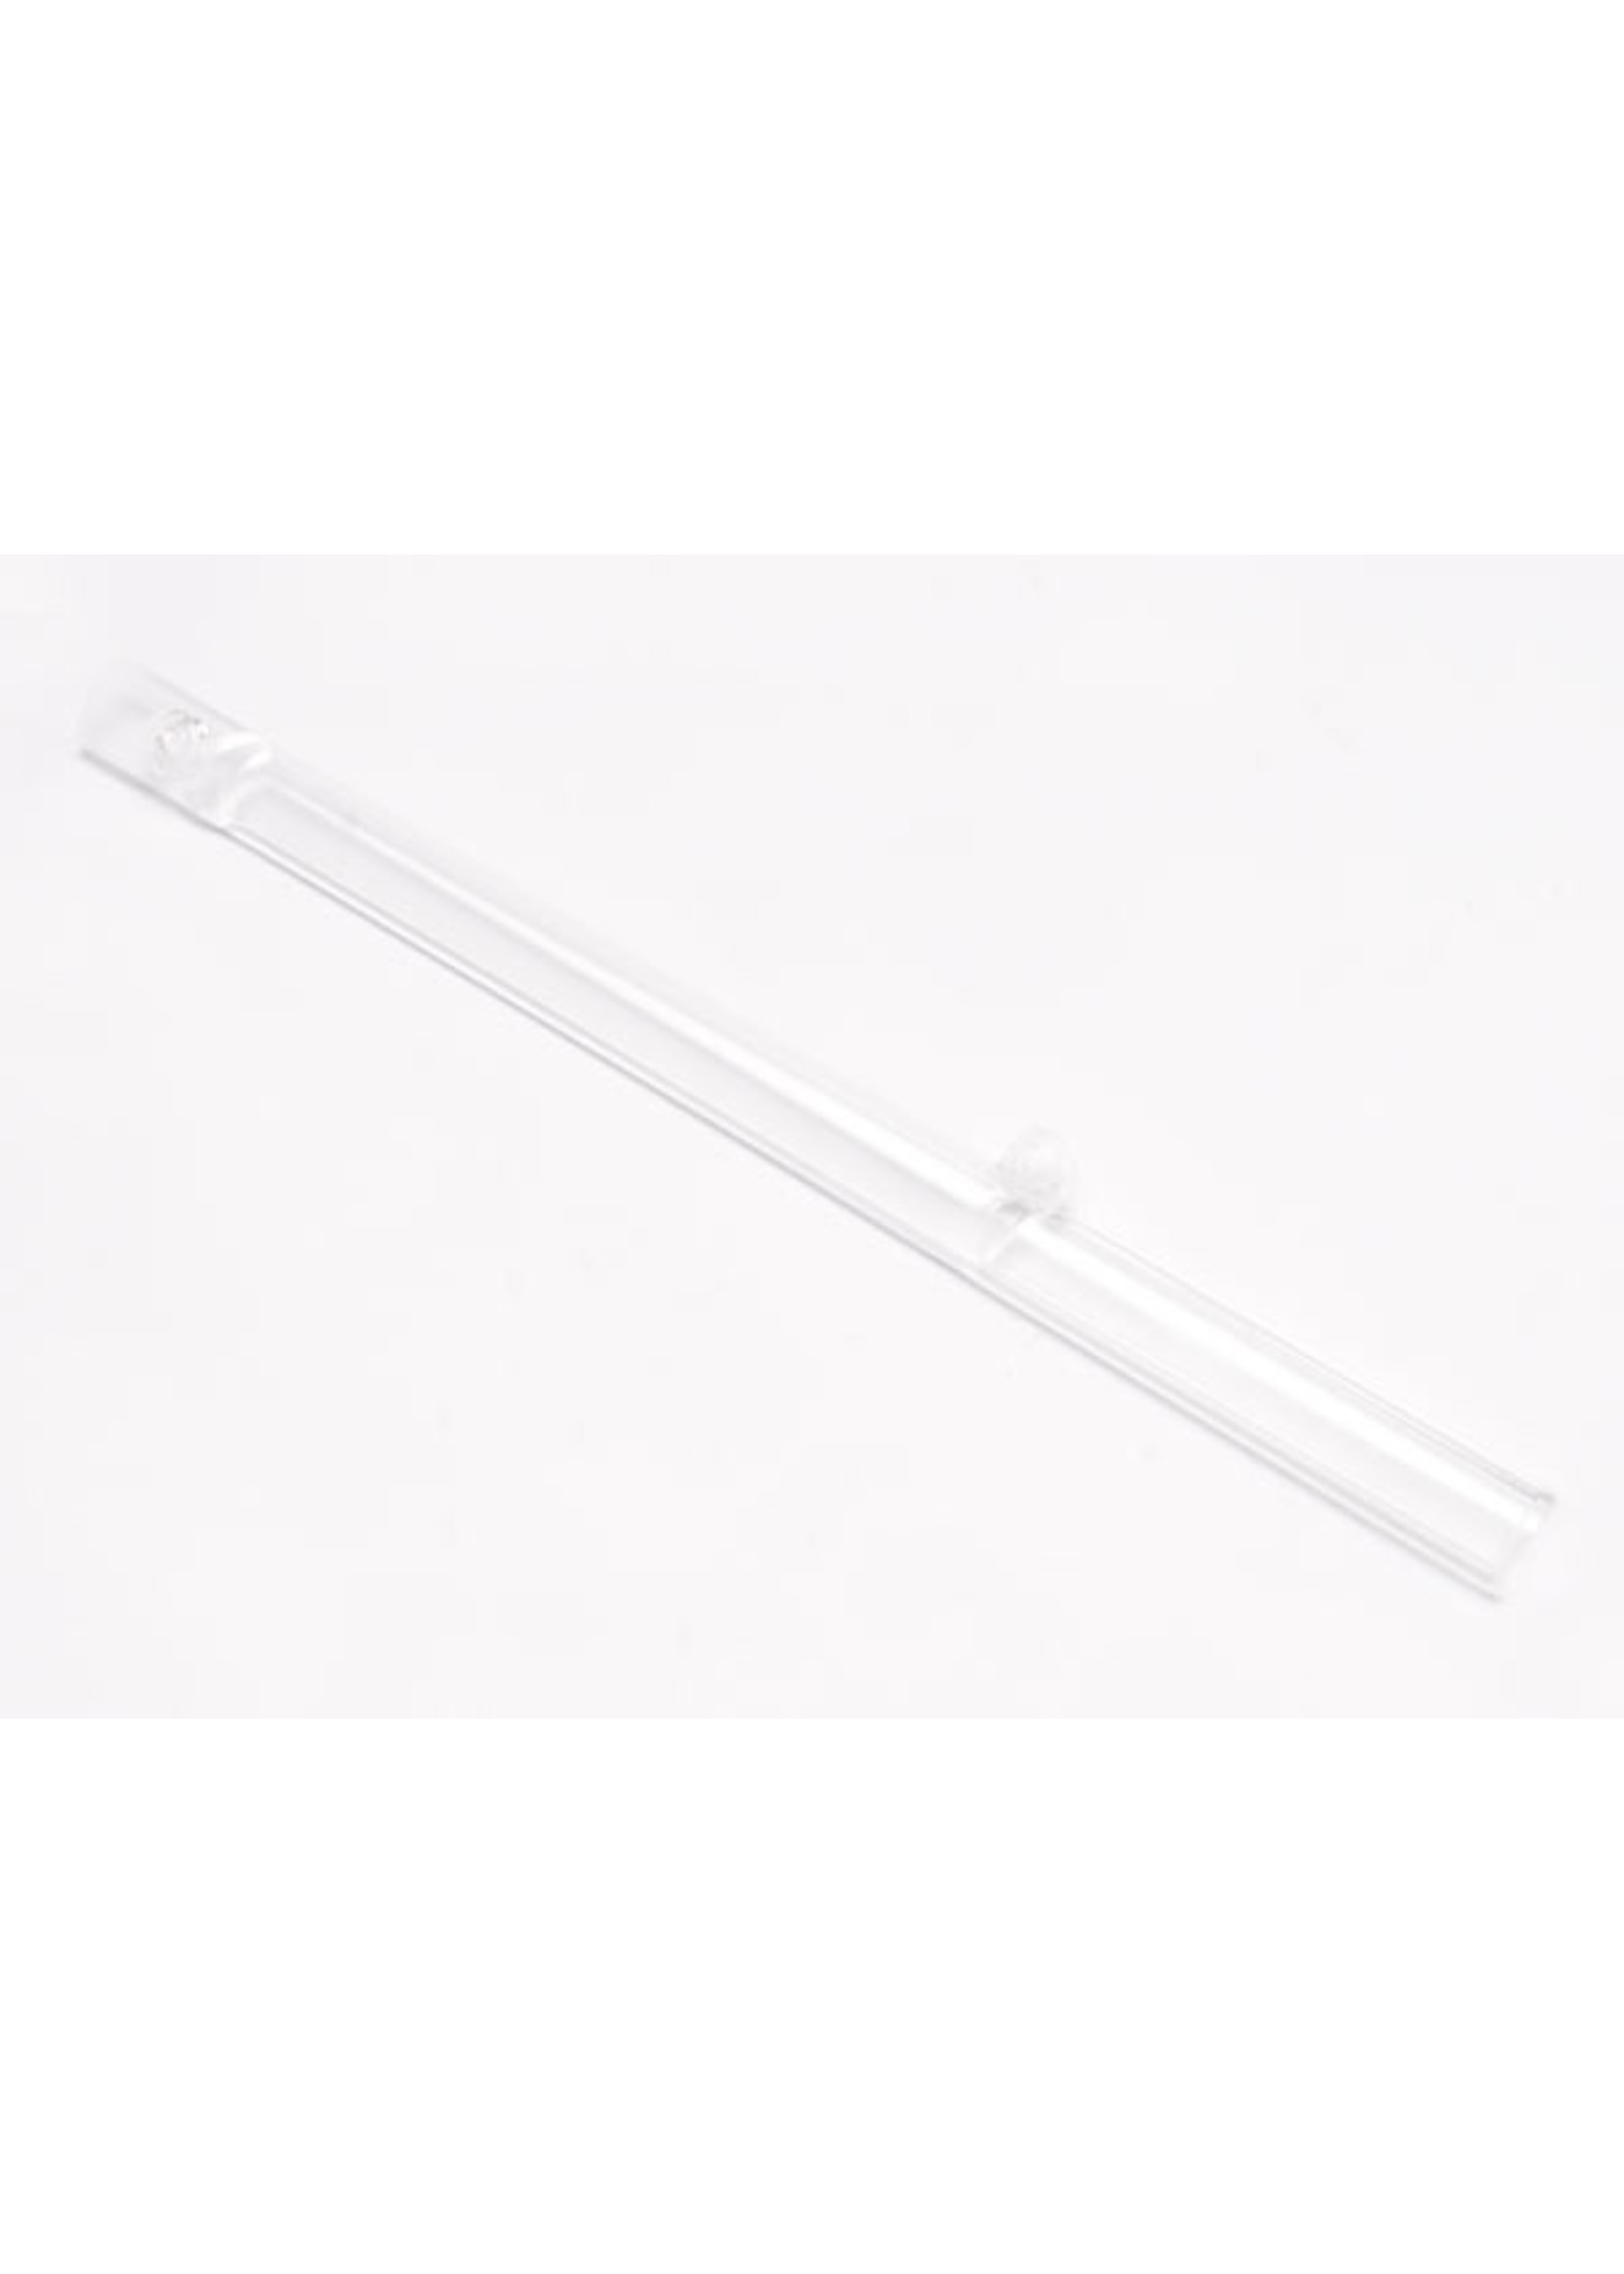 Traxxas 6841 - Center Driveshaft Cover - Clear